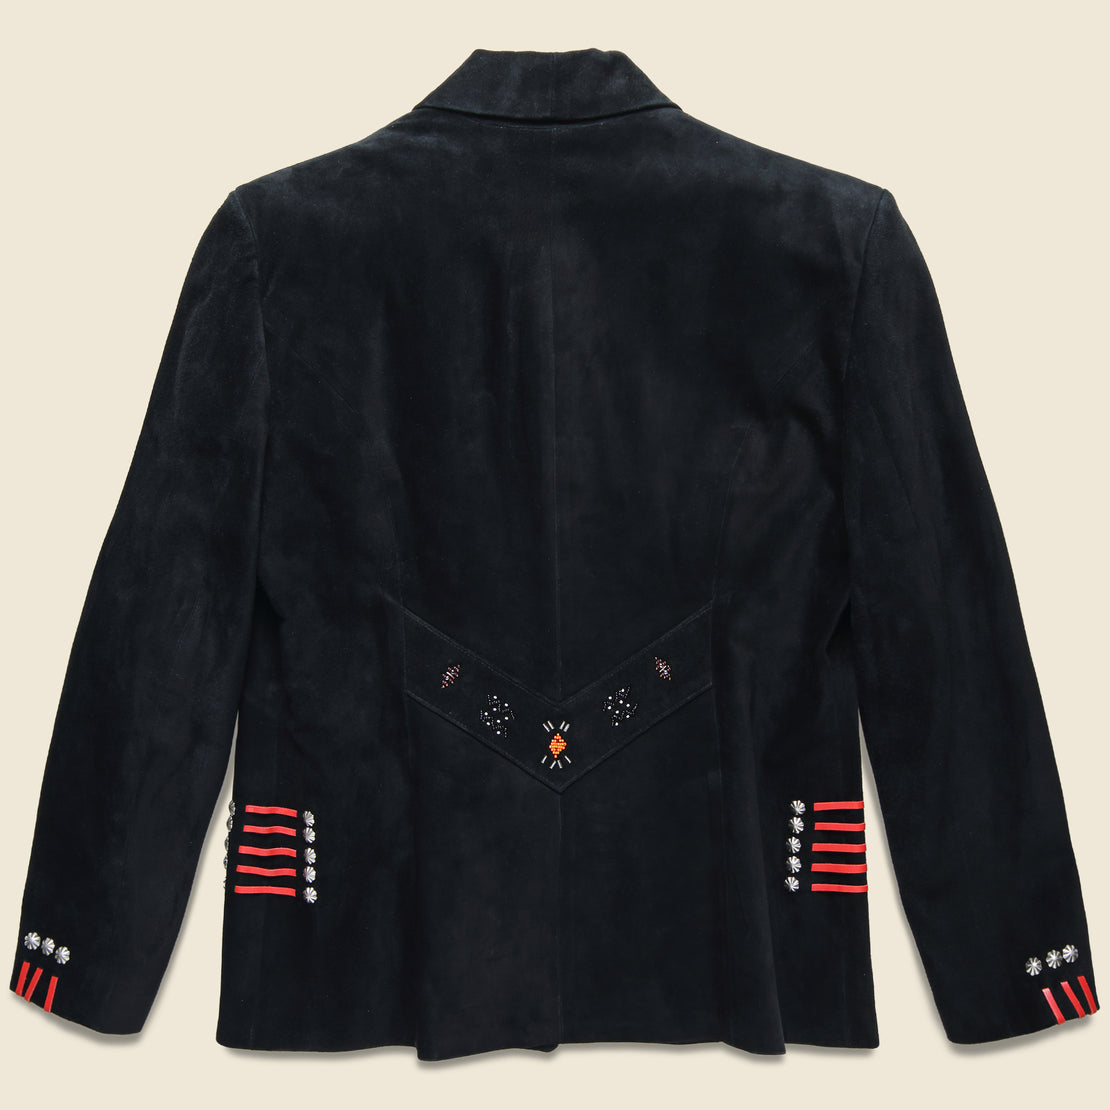 Frontier Bead & Concho Suede Jacket - Black - Vintage - STAG Provisions - W - One & Done - Apparel